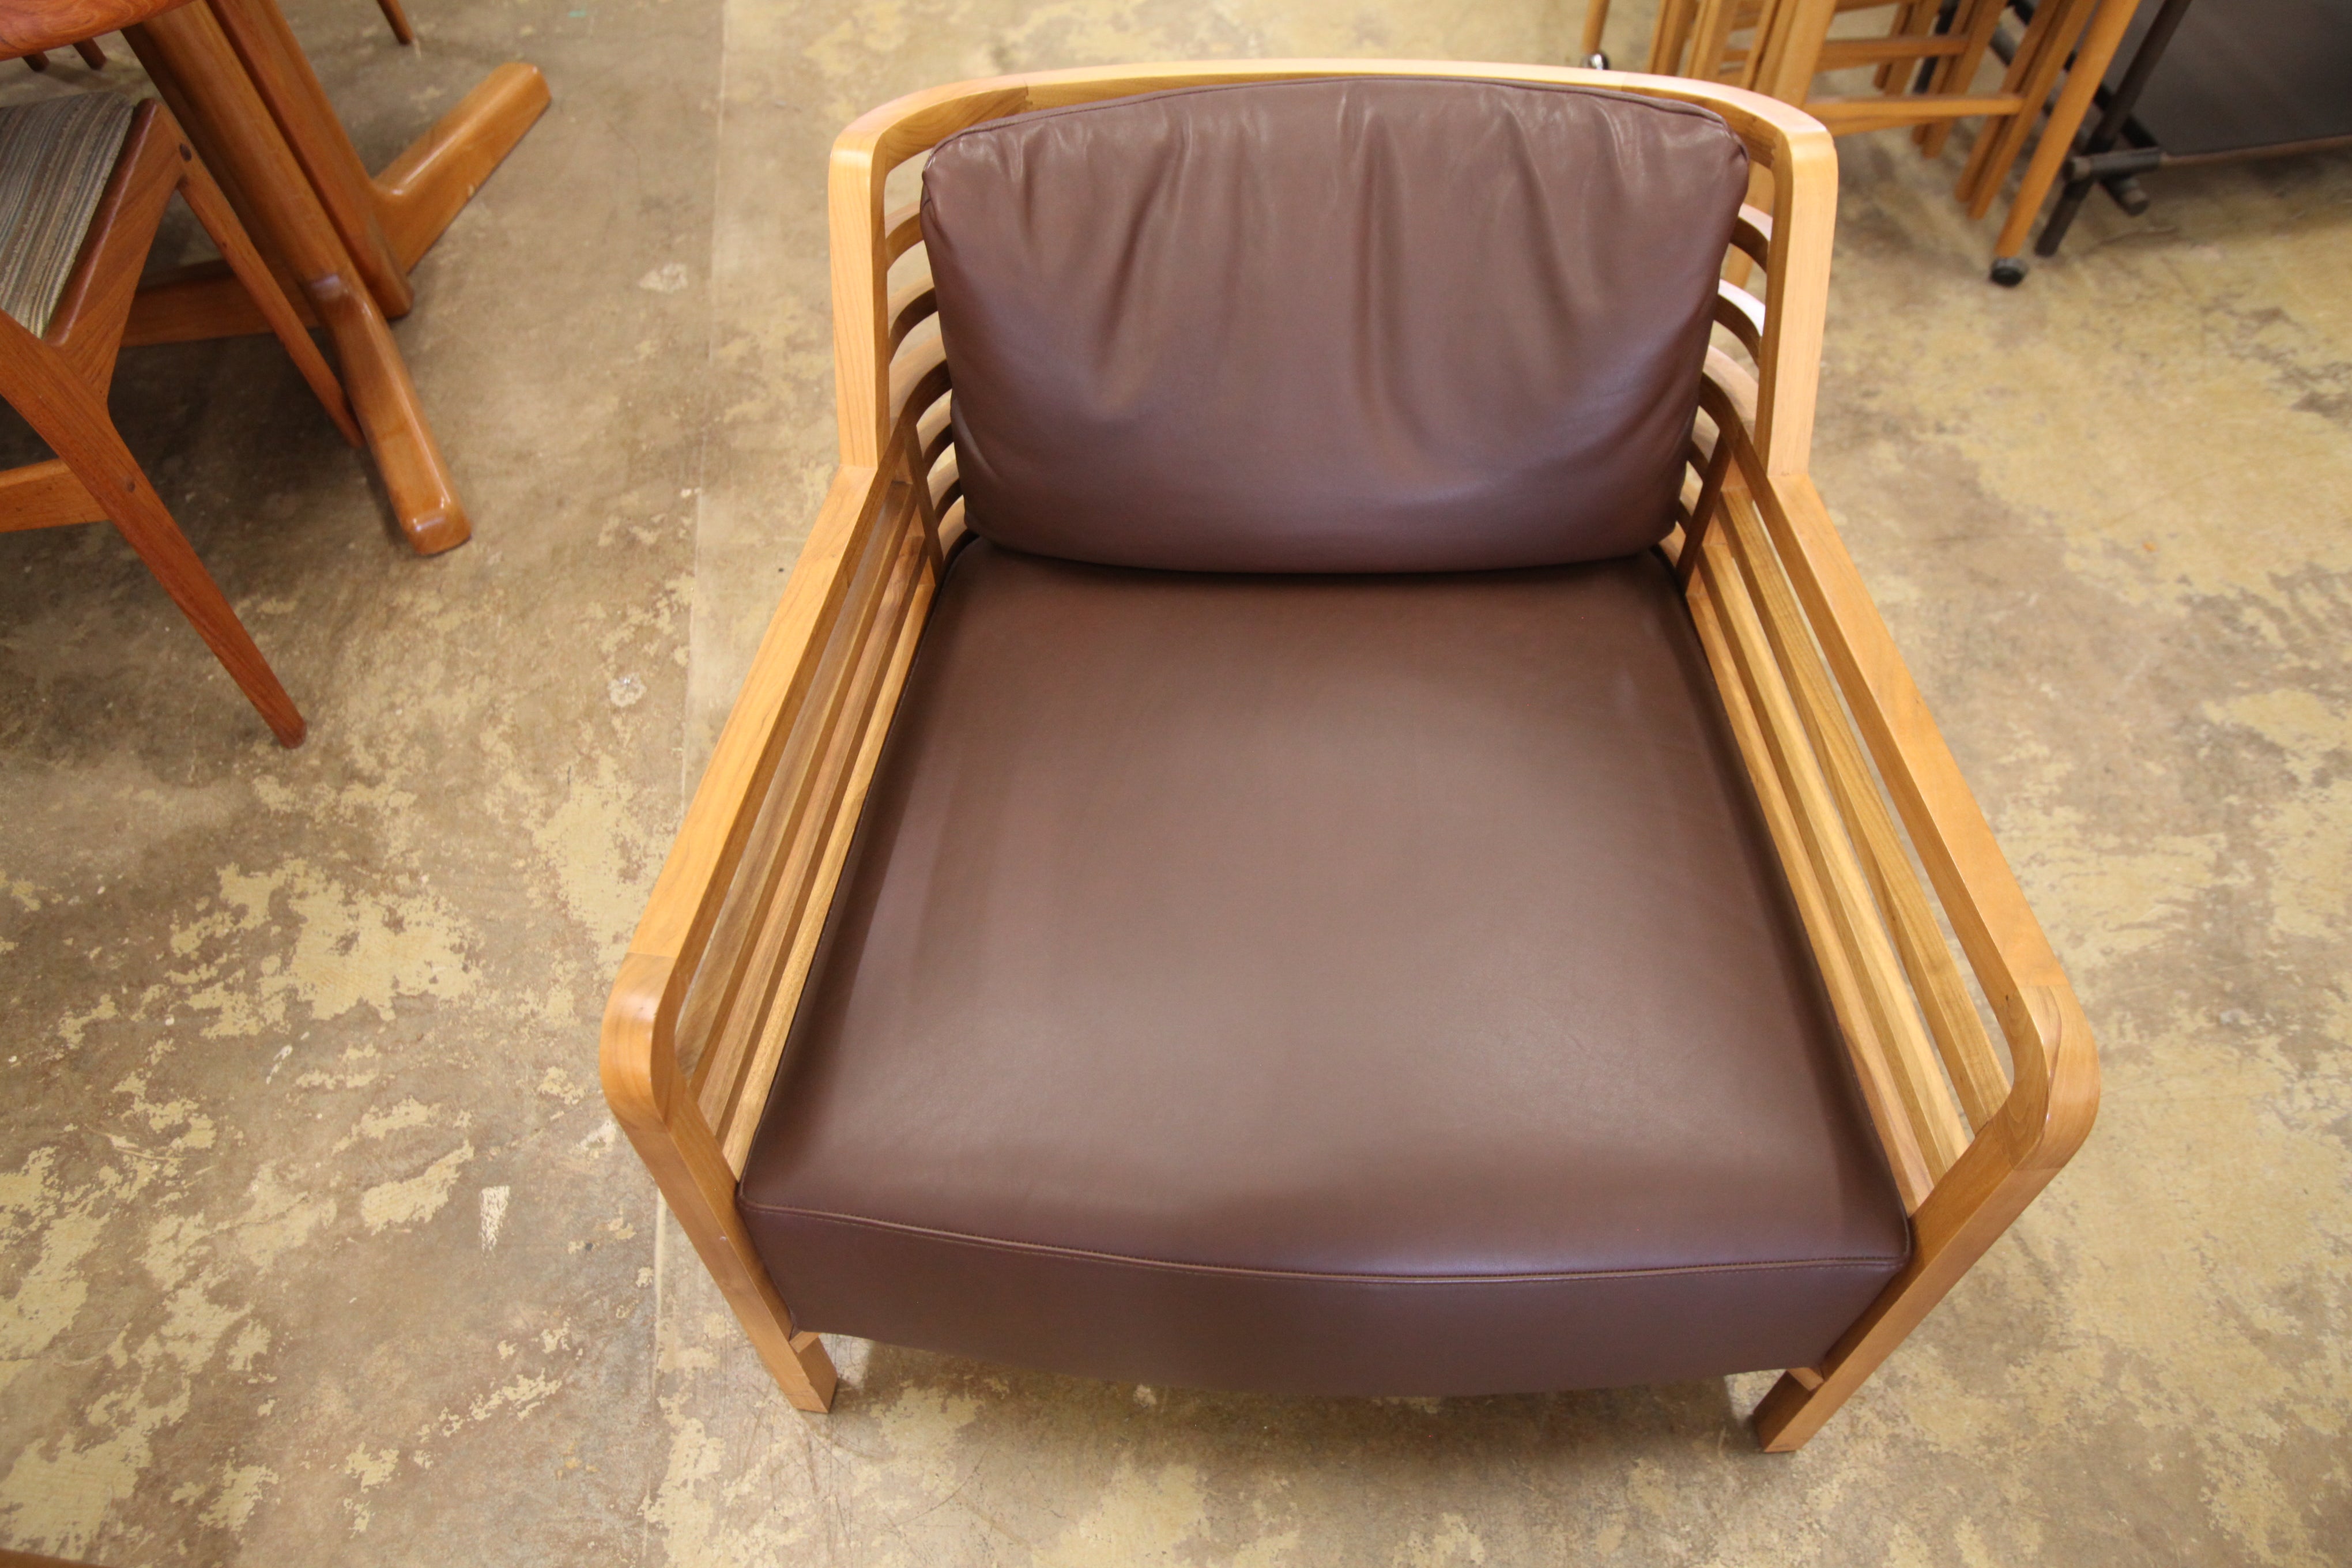 Rare Ligne Roset "FLAX" Chair In Walnut Wood / Brown Leather (30"W x 25"H x 31"D)